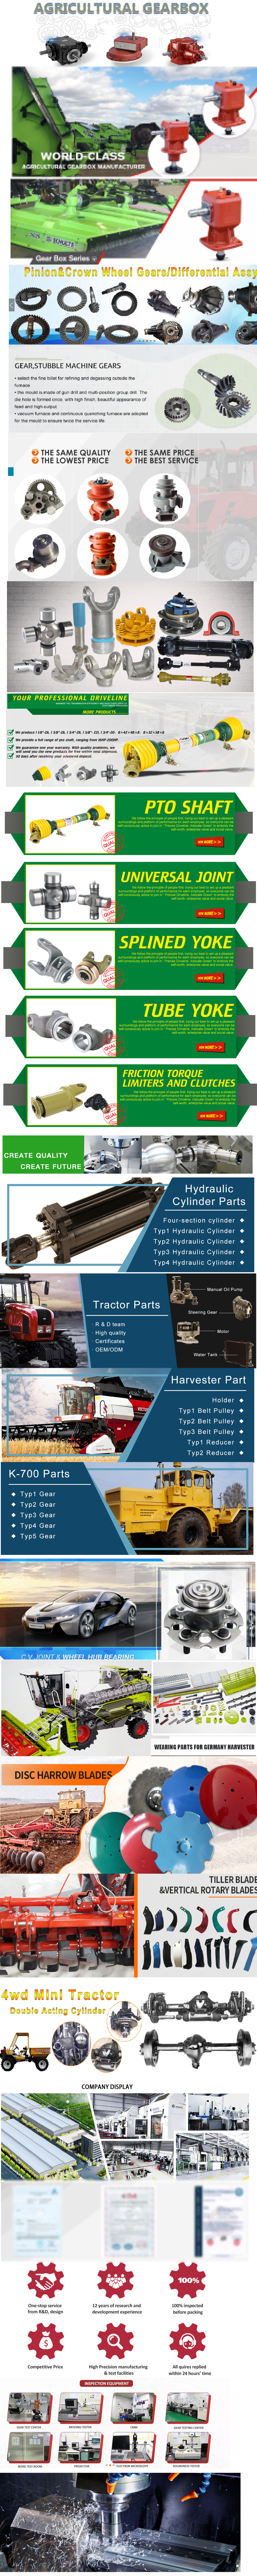 Best  made in China - replacement parts - agricultural gearbox manufacturer in China Top   1000 rpm to 540 rpm reducer   Bishkek Kyrgyzstan   Chinese Factory Tractor Mounted Round Hay Baler with ce certificate top quality low price suitable for Tractor, Agricultural machines, right angle pto shaft drive 